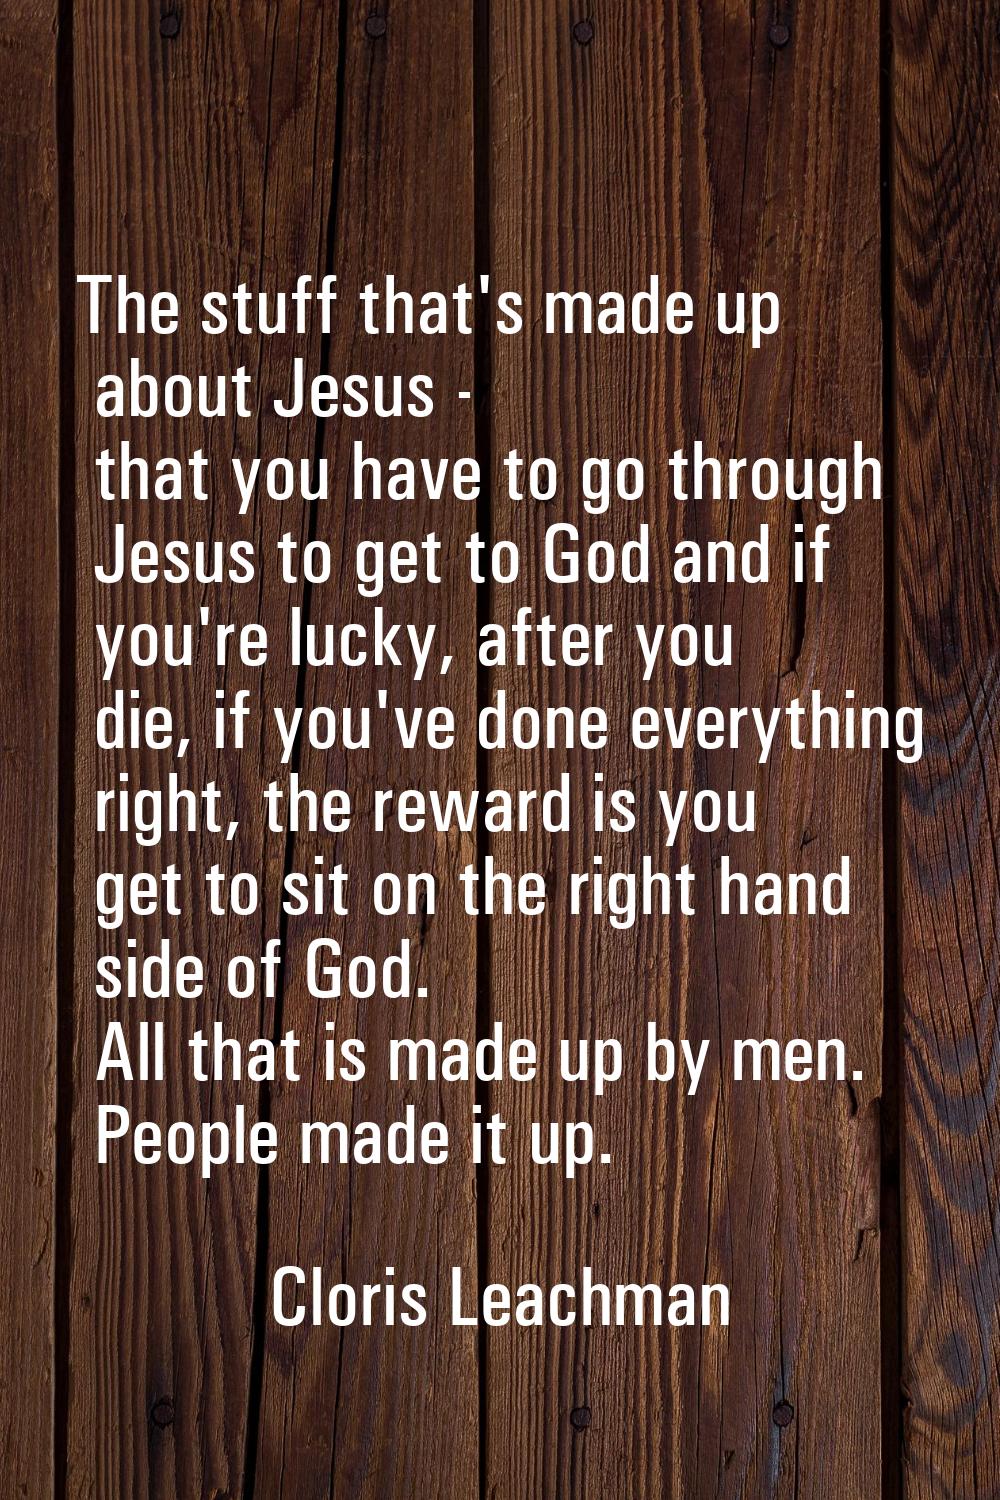 The stuff that's made up about Jesus - that you have to go through Jesus to get to God and if you'r